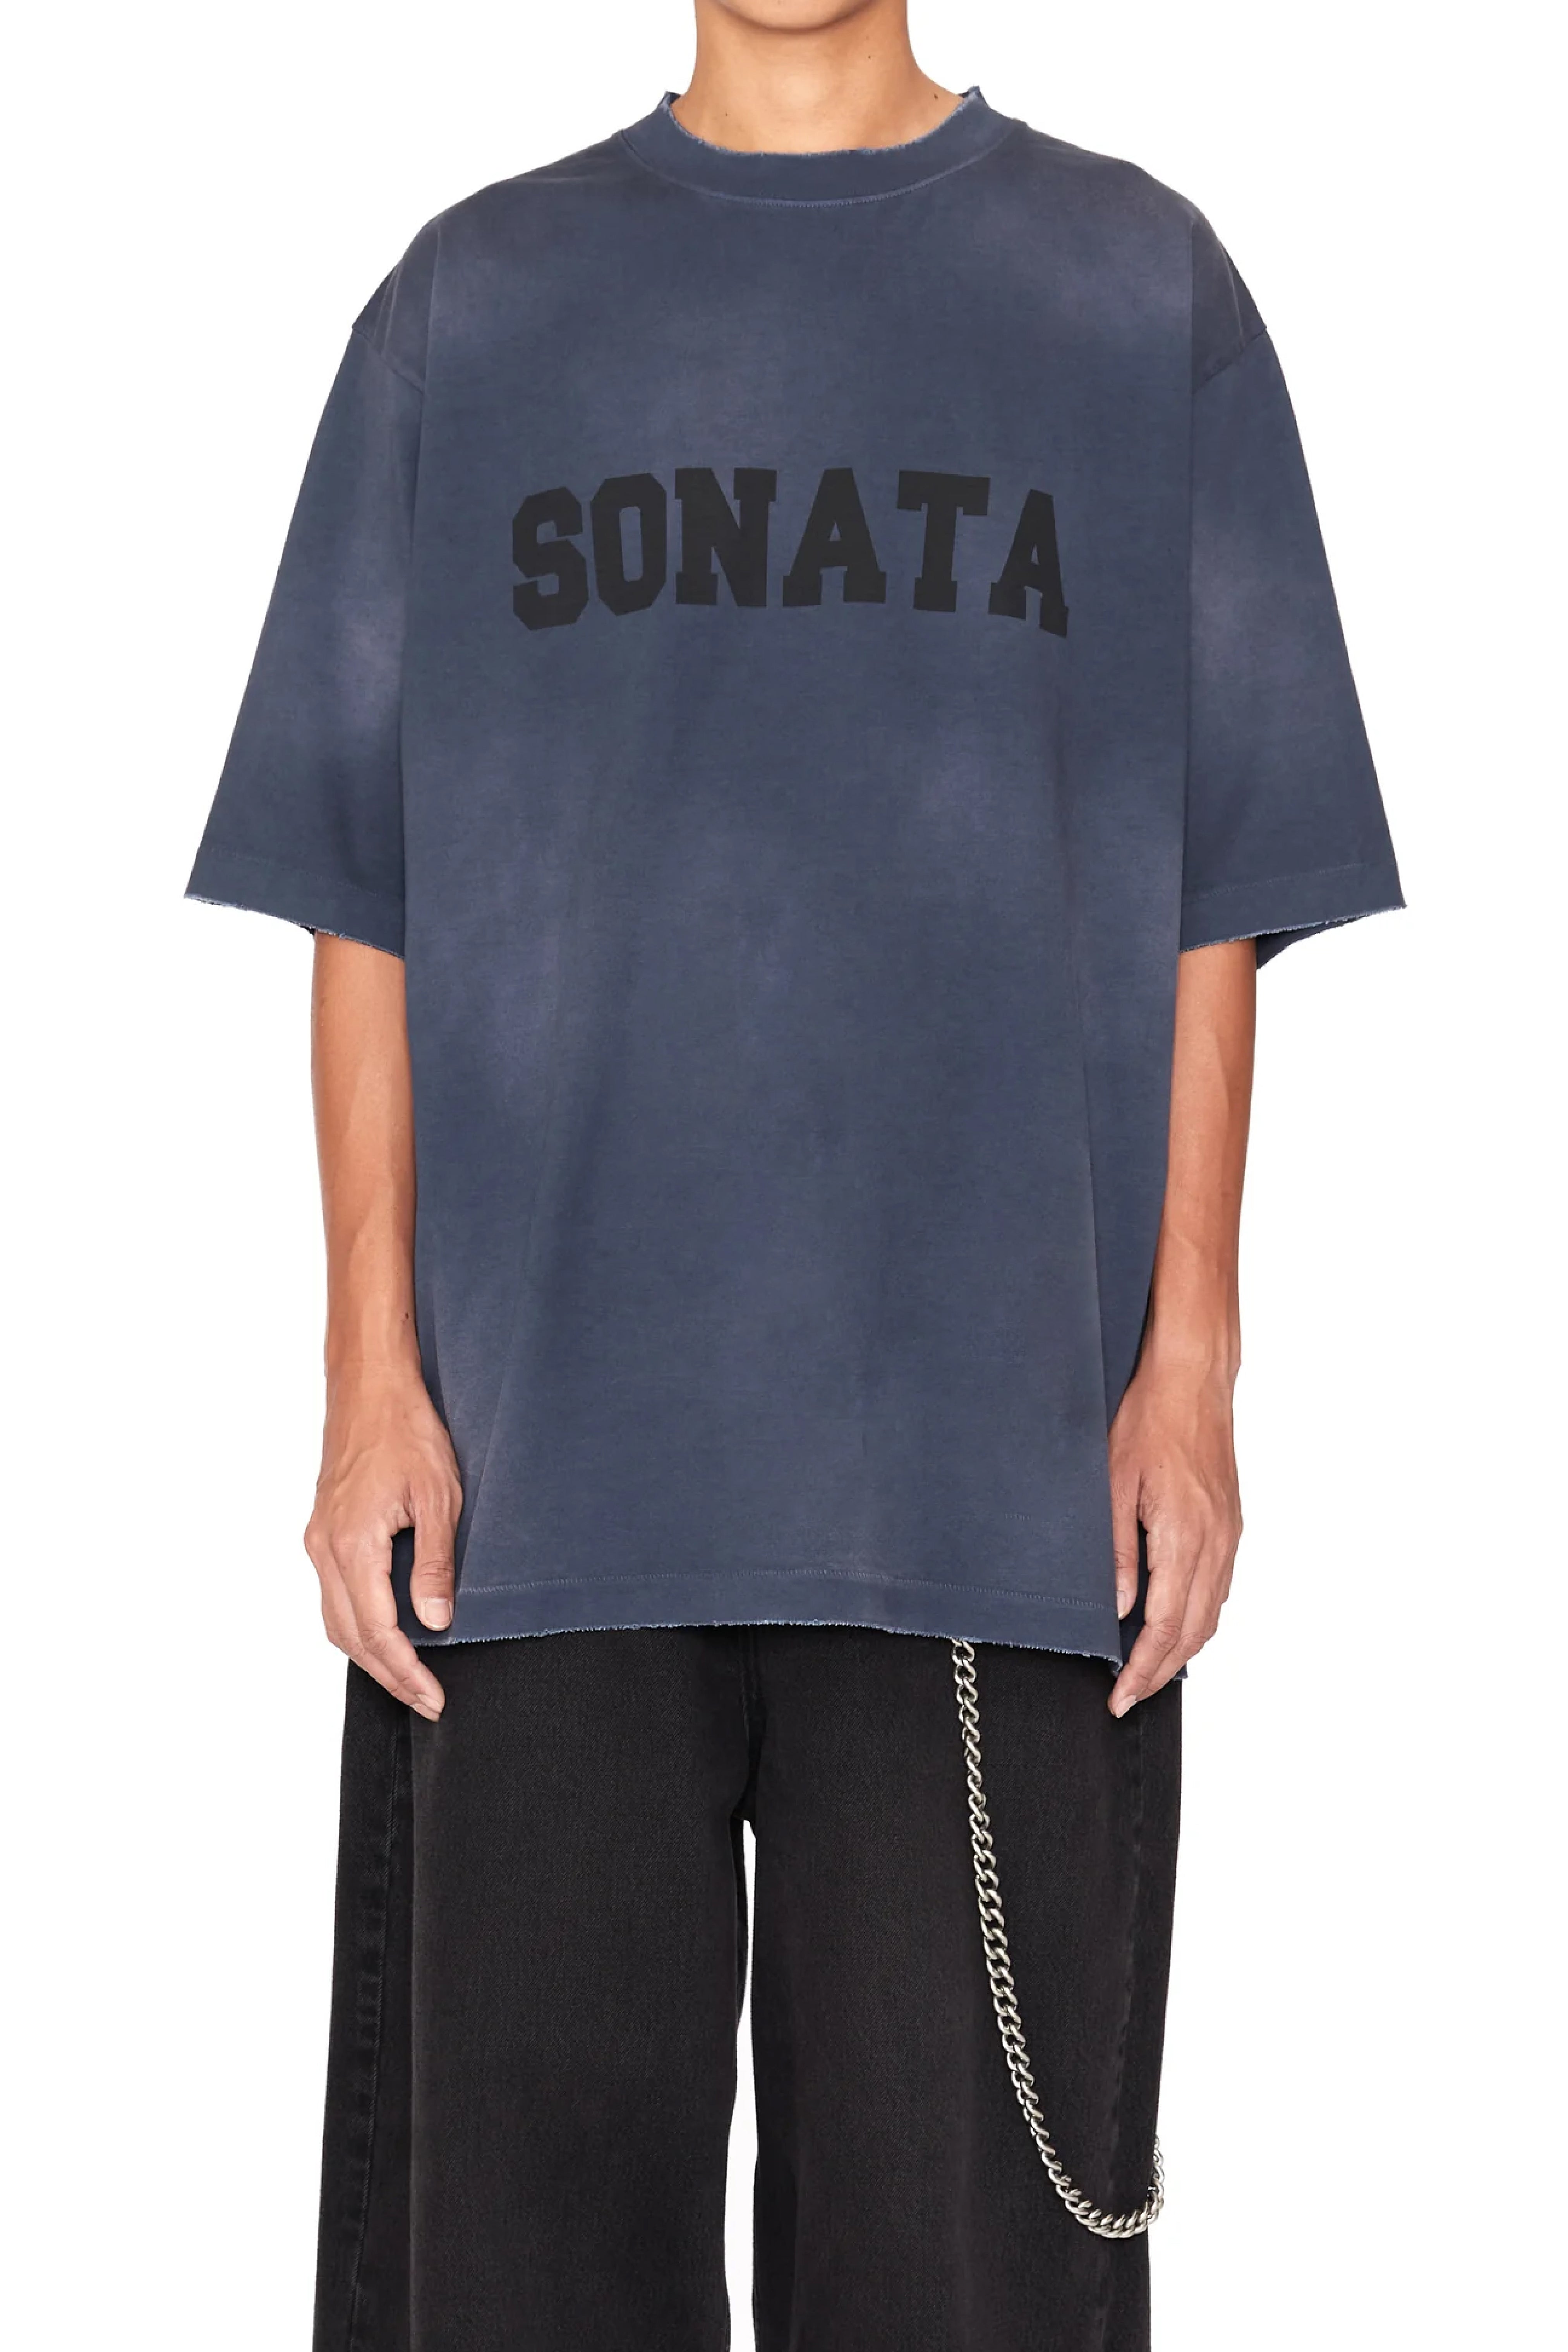 Load image into Gallery viewer, ASH BLUE WASHED DISTRESSED AGING SONATA PRINTED SHORT SLEEVE T-SHIRT
